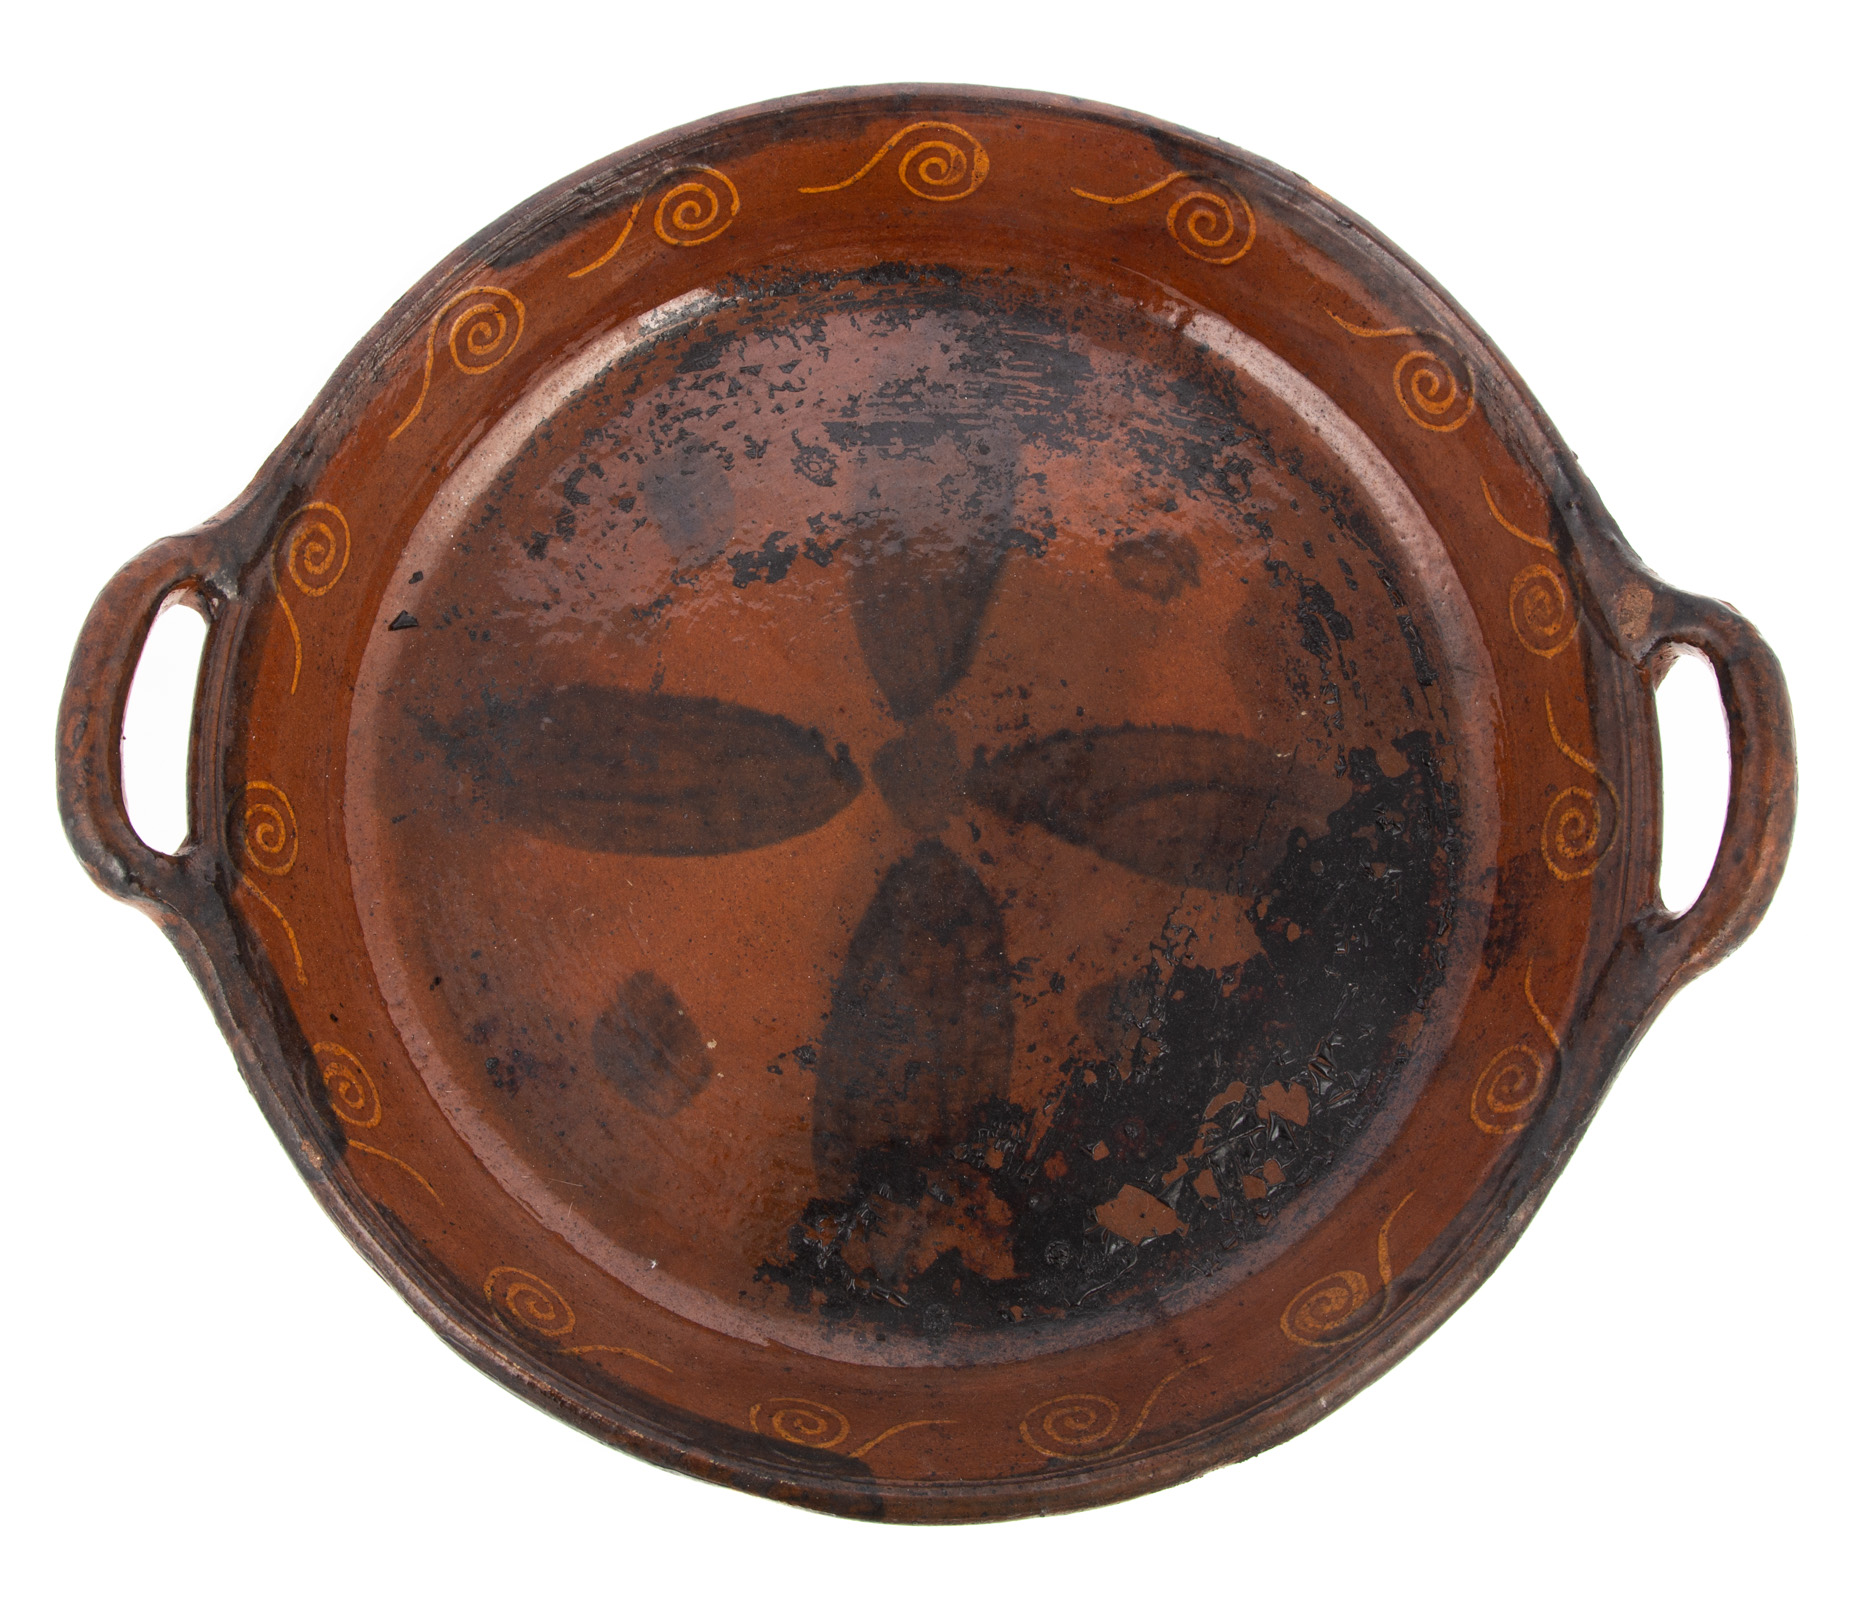 AMERICAN REDWARE SERVING TRAY 19th